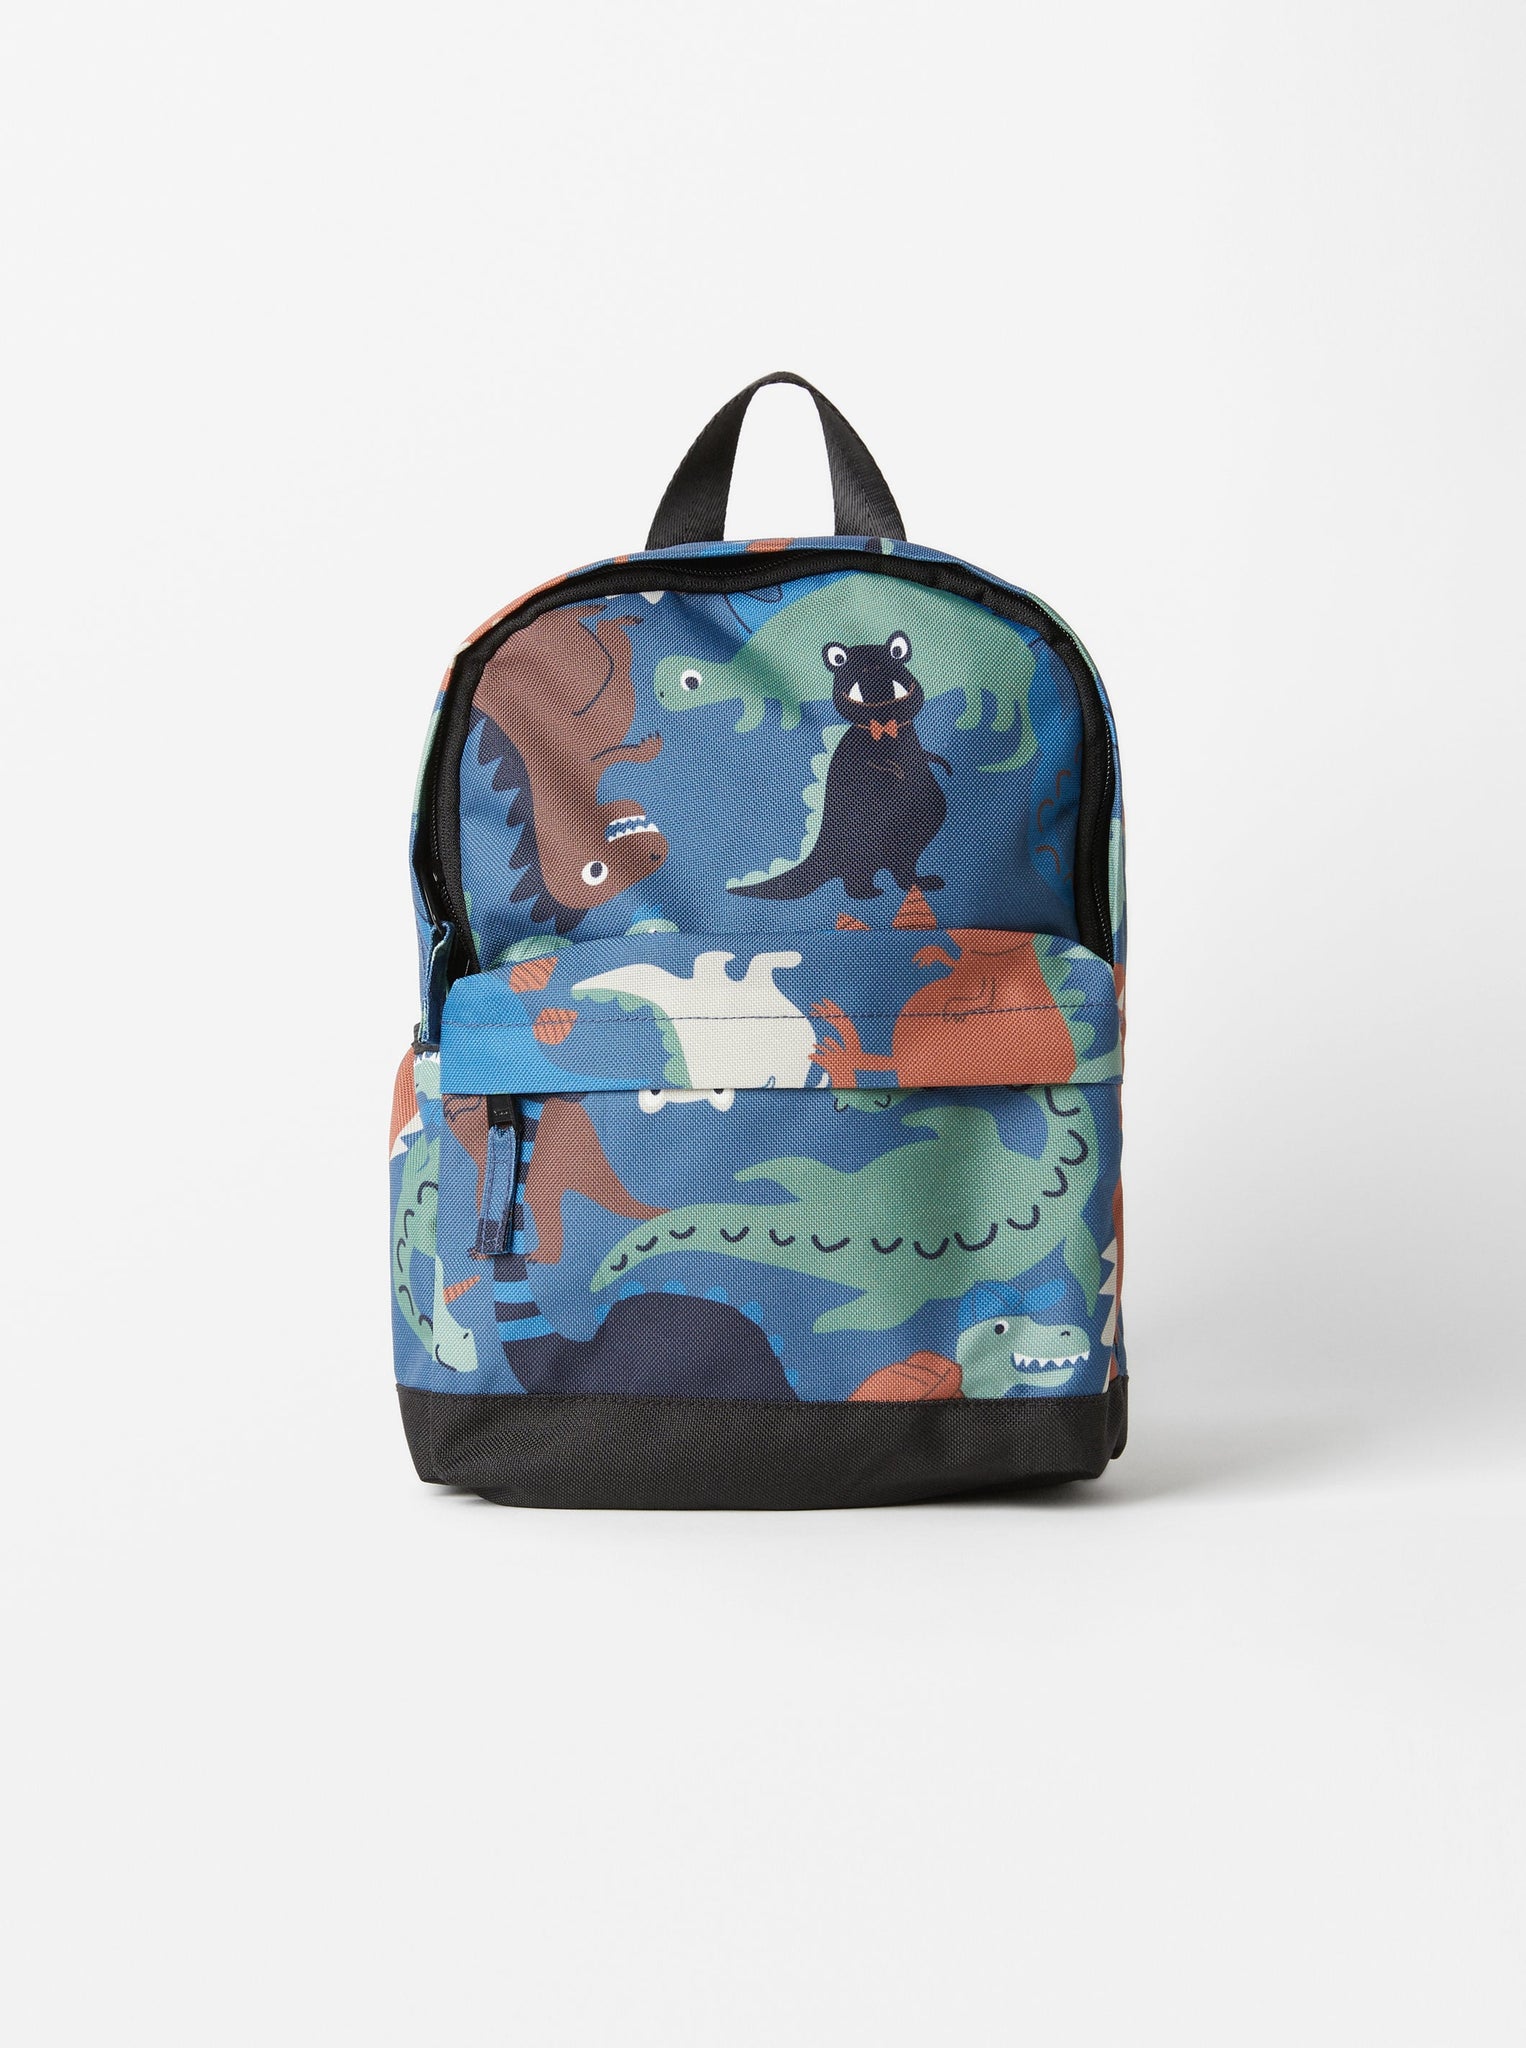 Dinosaur Print Kids Backpack from the Polarn O. Pyret Kidswear collection. Clothes made using sustainably sourced materials.